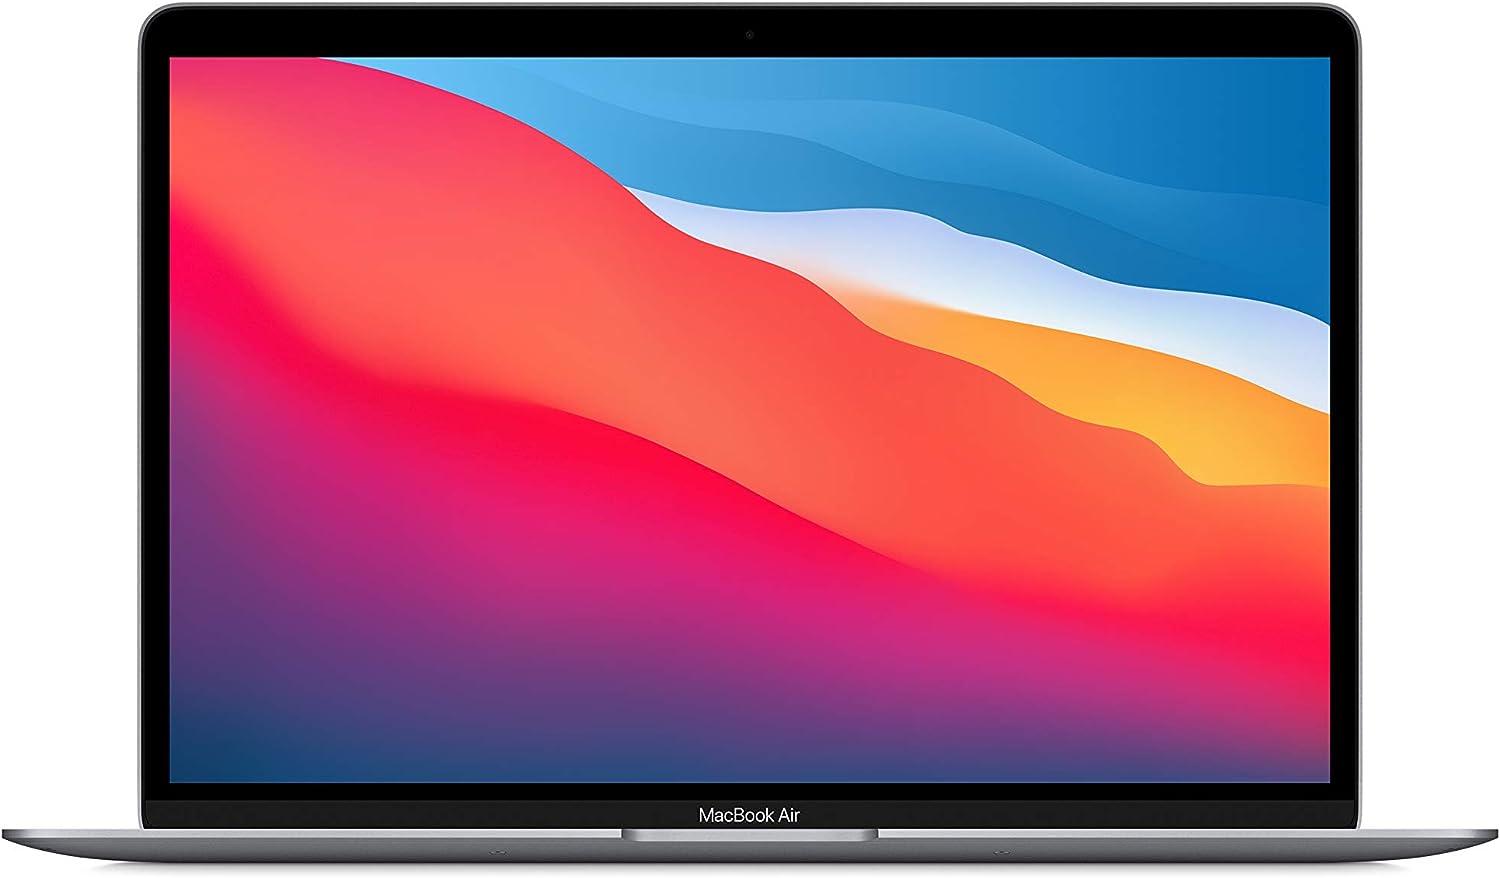 Brand	Apple  Model Name	MacBook Air  Screen Size	13.3 Inches  Color	Space Gray  Hard Disk Size	256 GB  CPU Model	Unknown  Ram Memory Installed Size	8 GB  Operating System	Mac OS  Special Feature	Backlit Keyboard  Graphics Card Description	Integrated